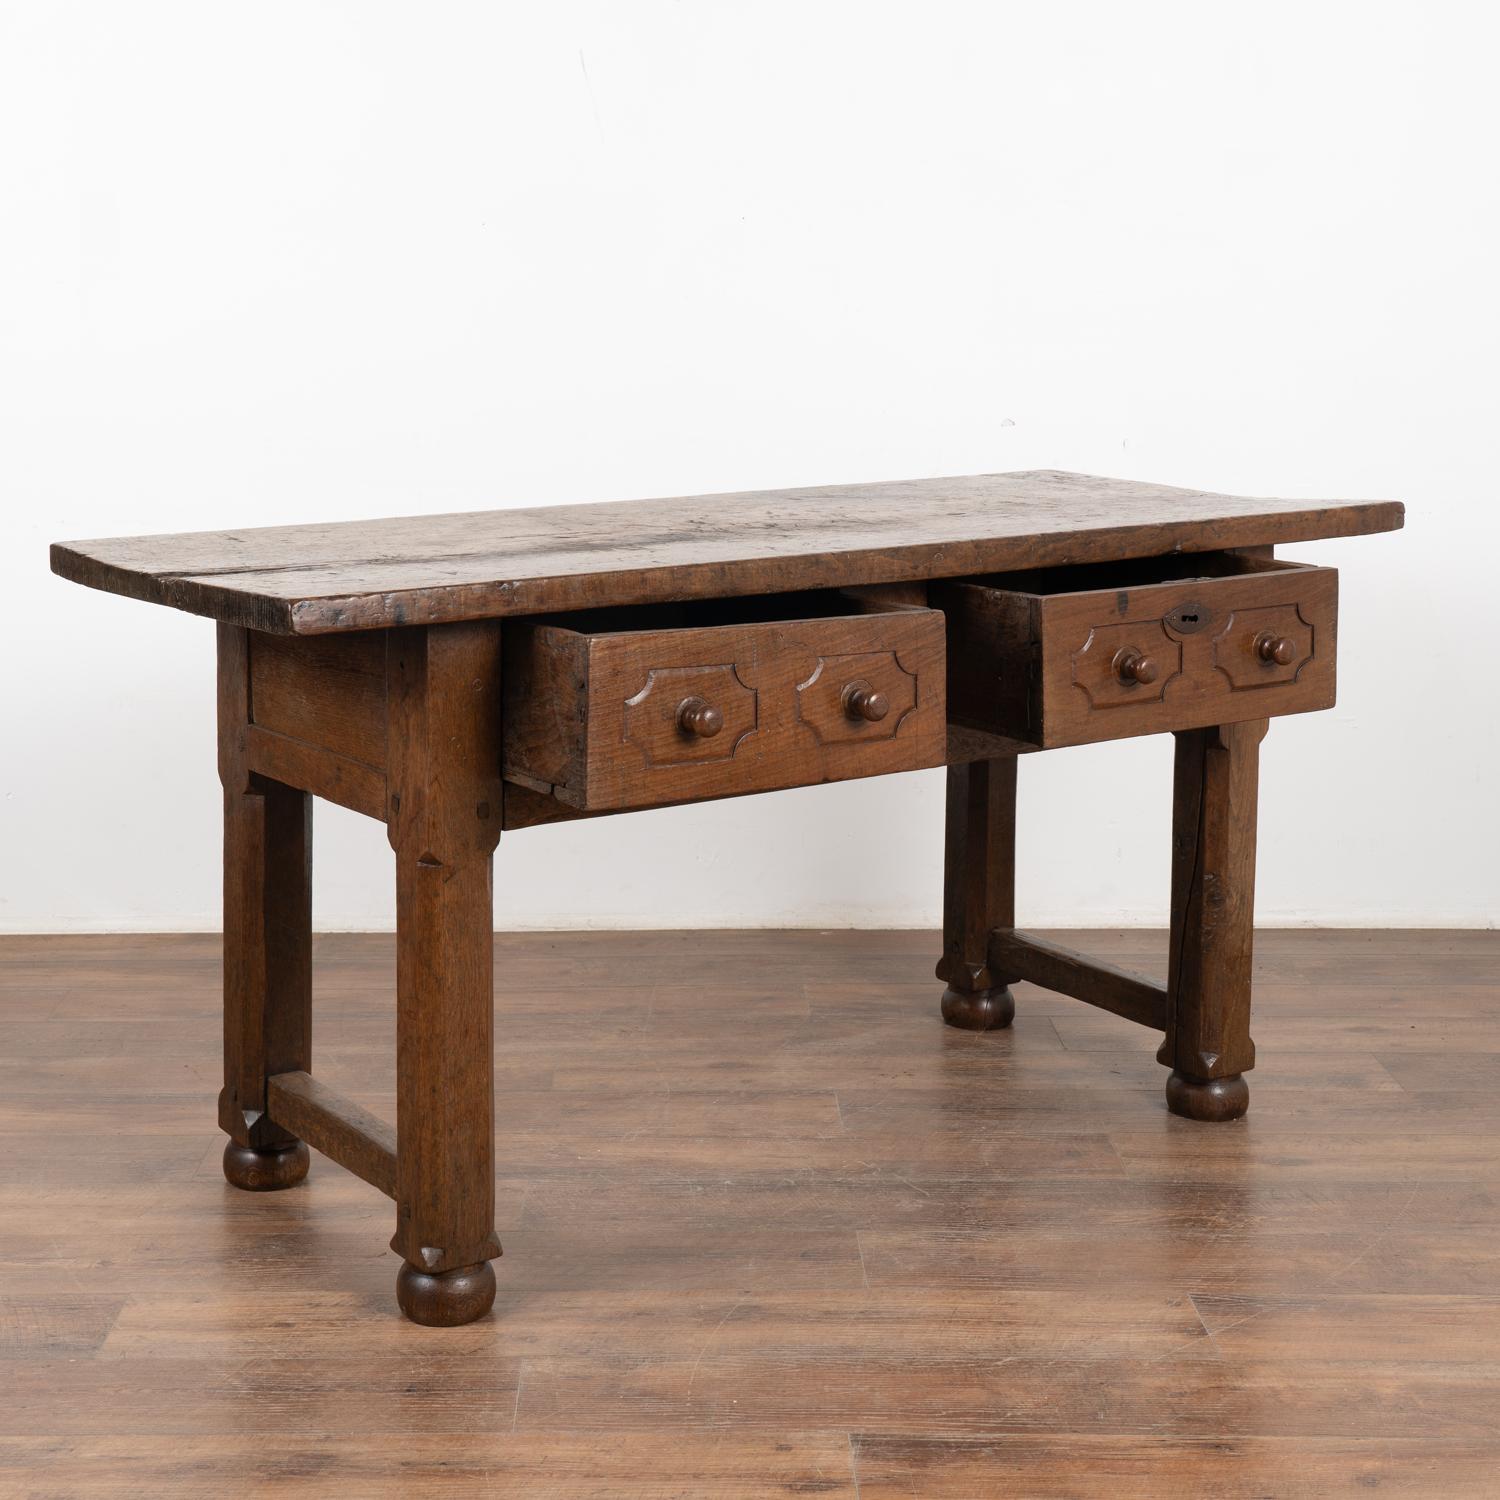 Rustic Dark Oak Console Table with Two Drawers, Spain 1800's For Sale